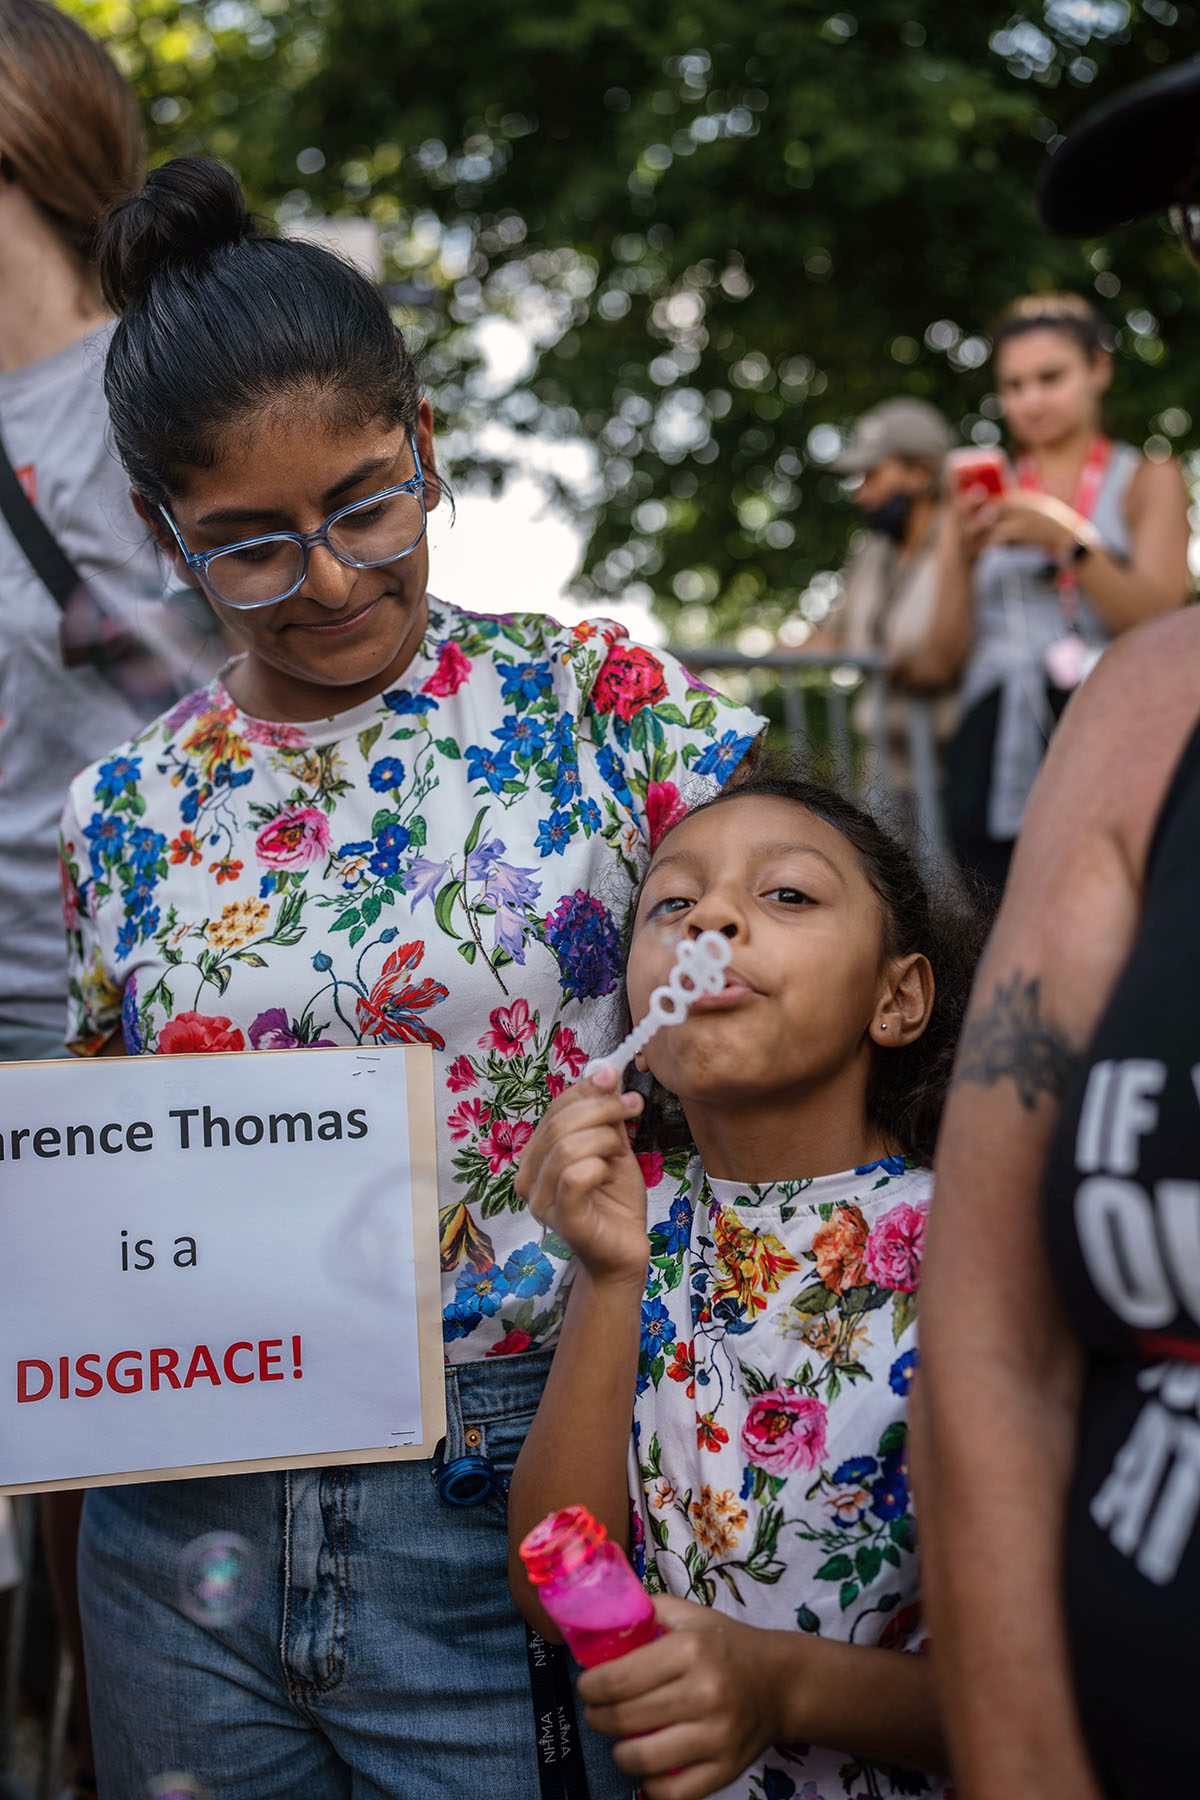 Jocelyn Canas poses with daughter Olive Nemorin, 9, as she blows soap bubbles. Jocelyn Canas holds a sign that reads "Clarence Thomas is a Disgrace!"